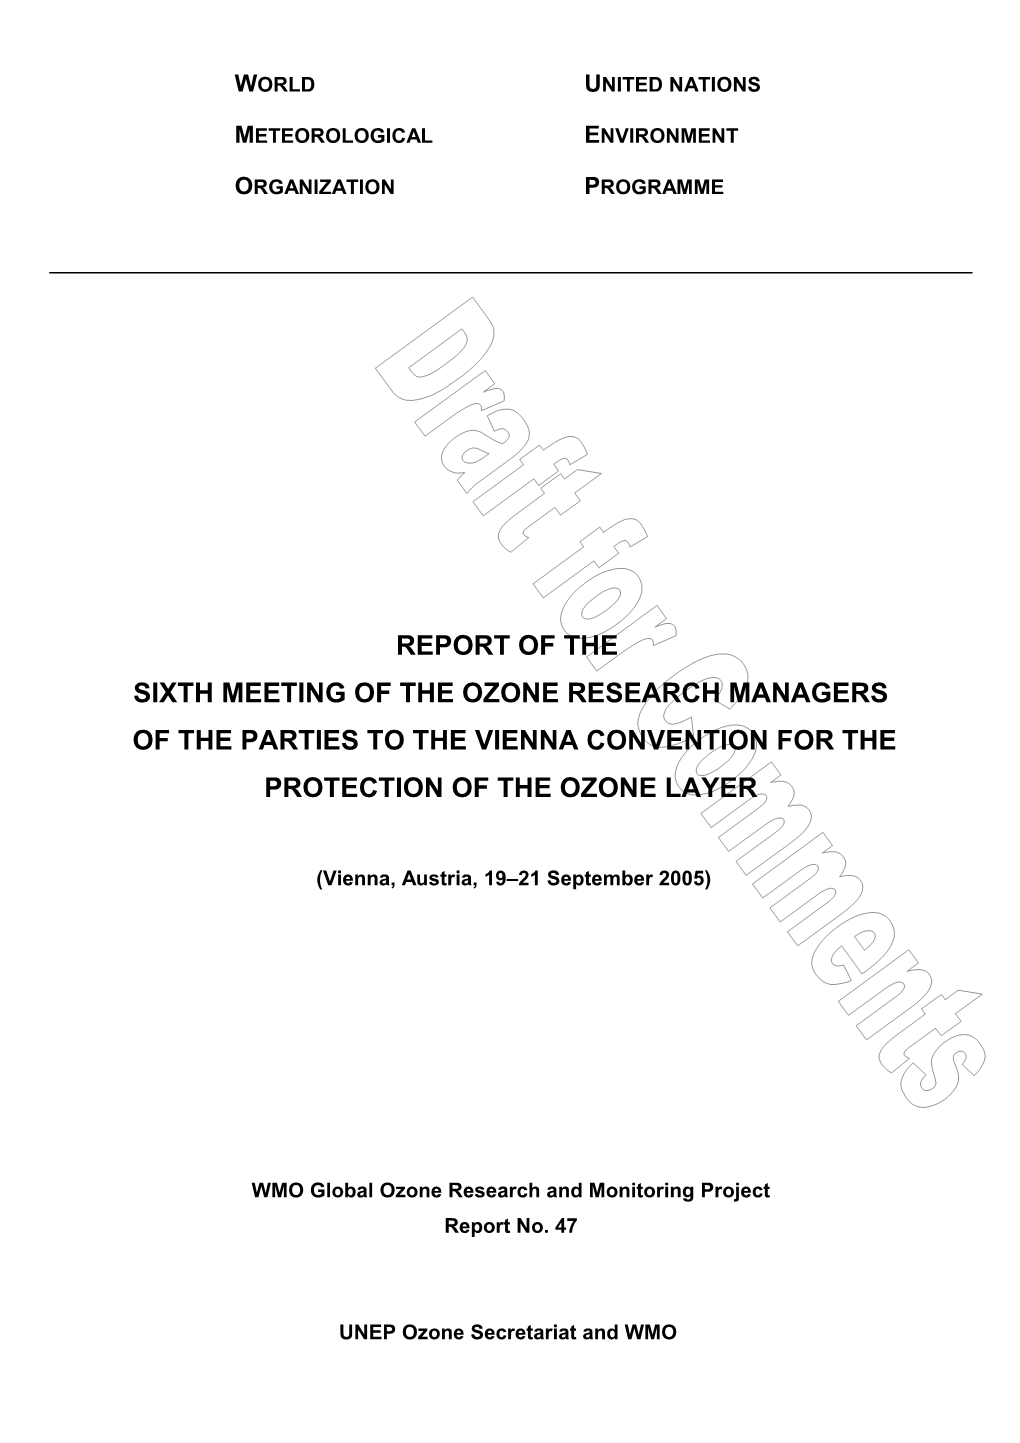 Sixth Meeting of the Ozone Research Managers